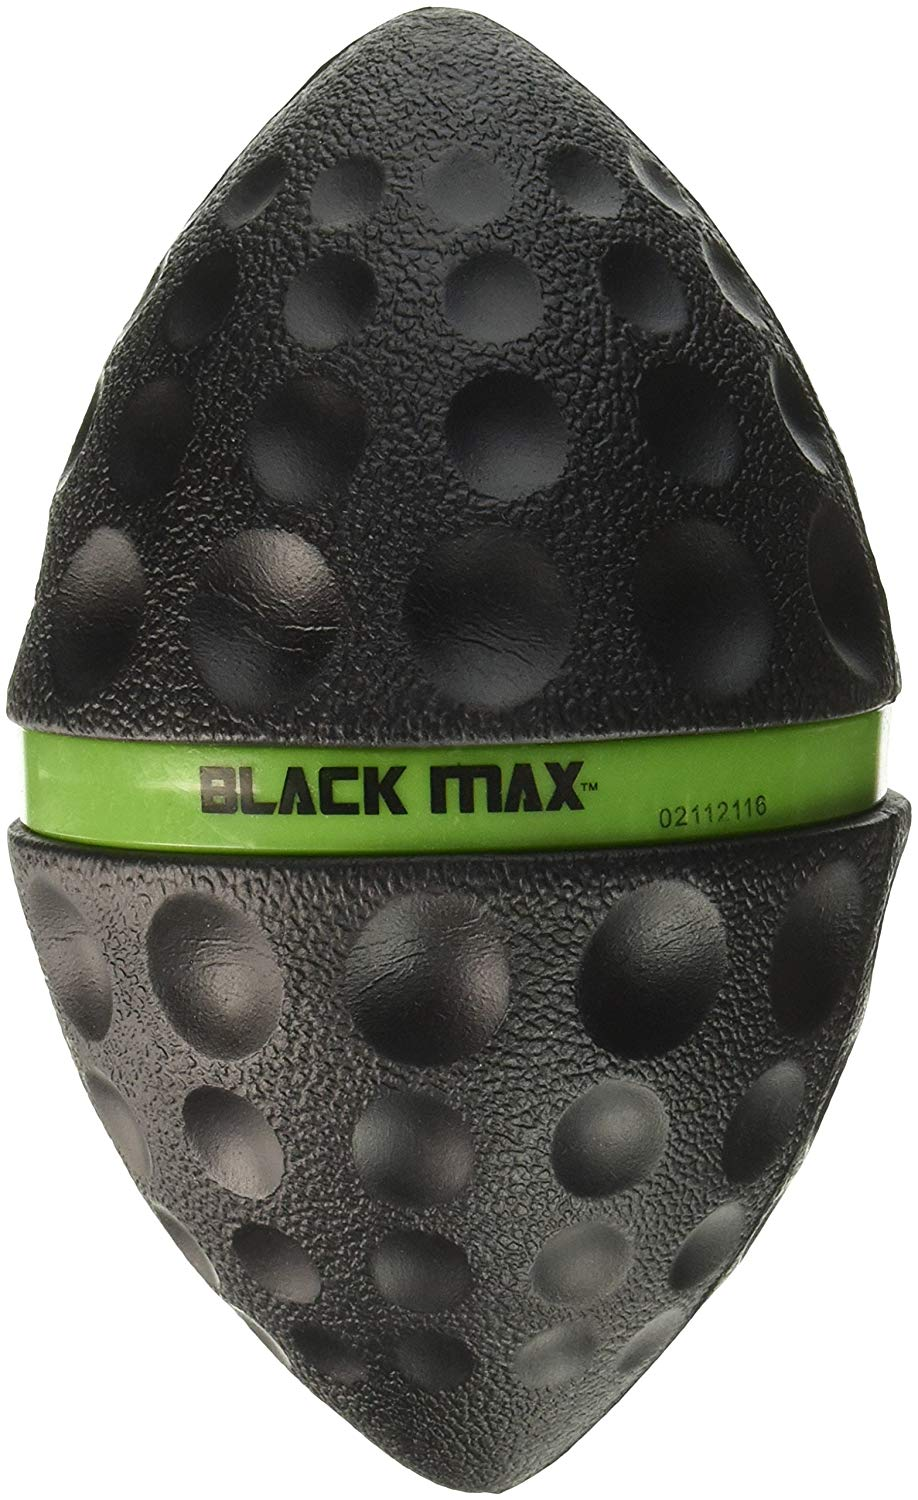 Wanna toss the pigskin with the bros like you're dang Tommy Wiseau? Grab a Black Max football and let'er rip.<br><br>Snag one from Amazon <a href="https://amzn.to/2Mu4yiy" "nofollow" target="_blank">here</a>.